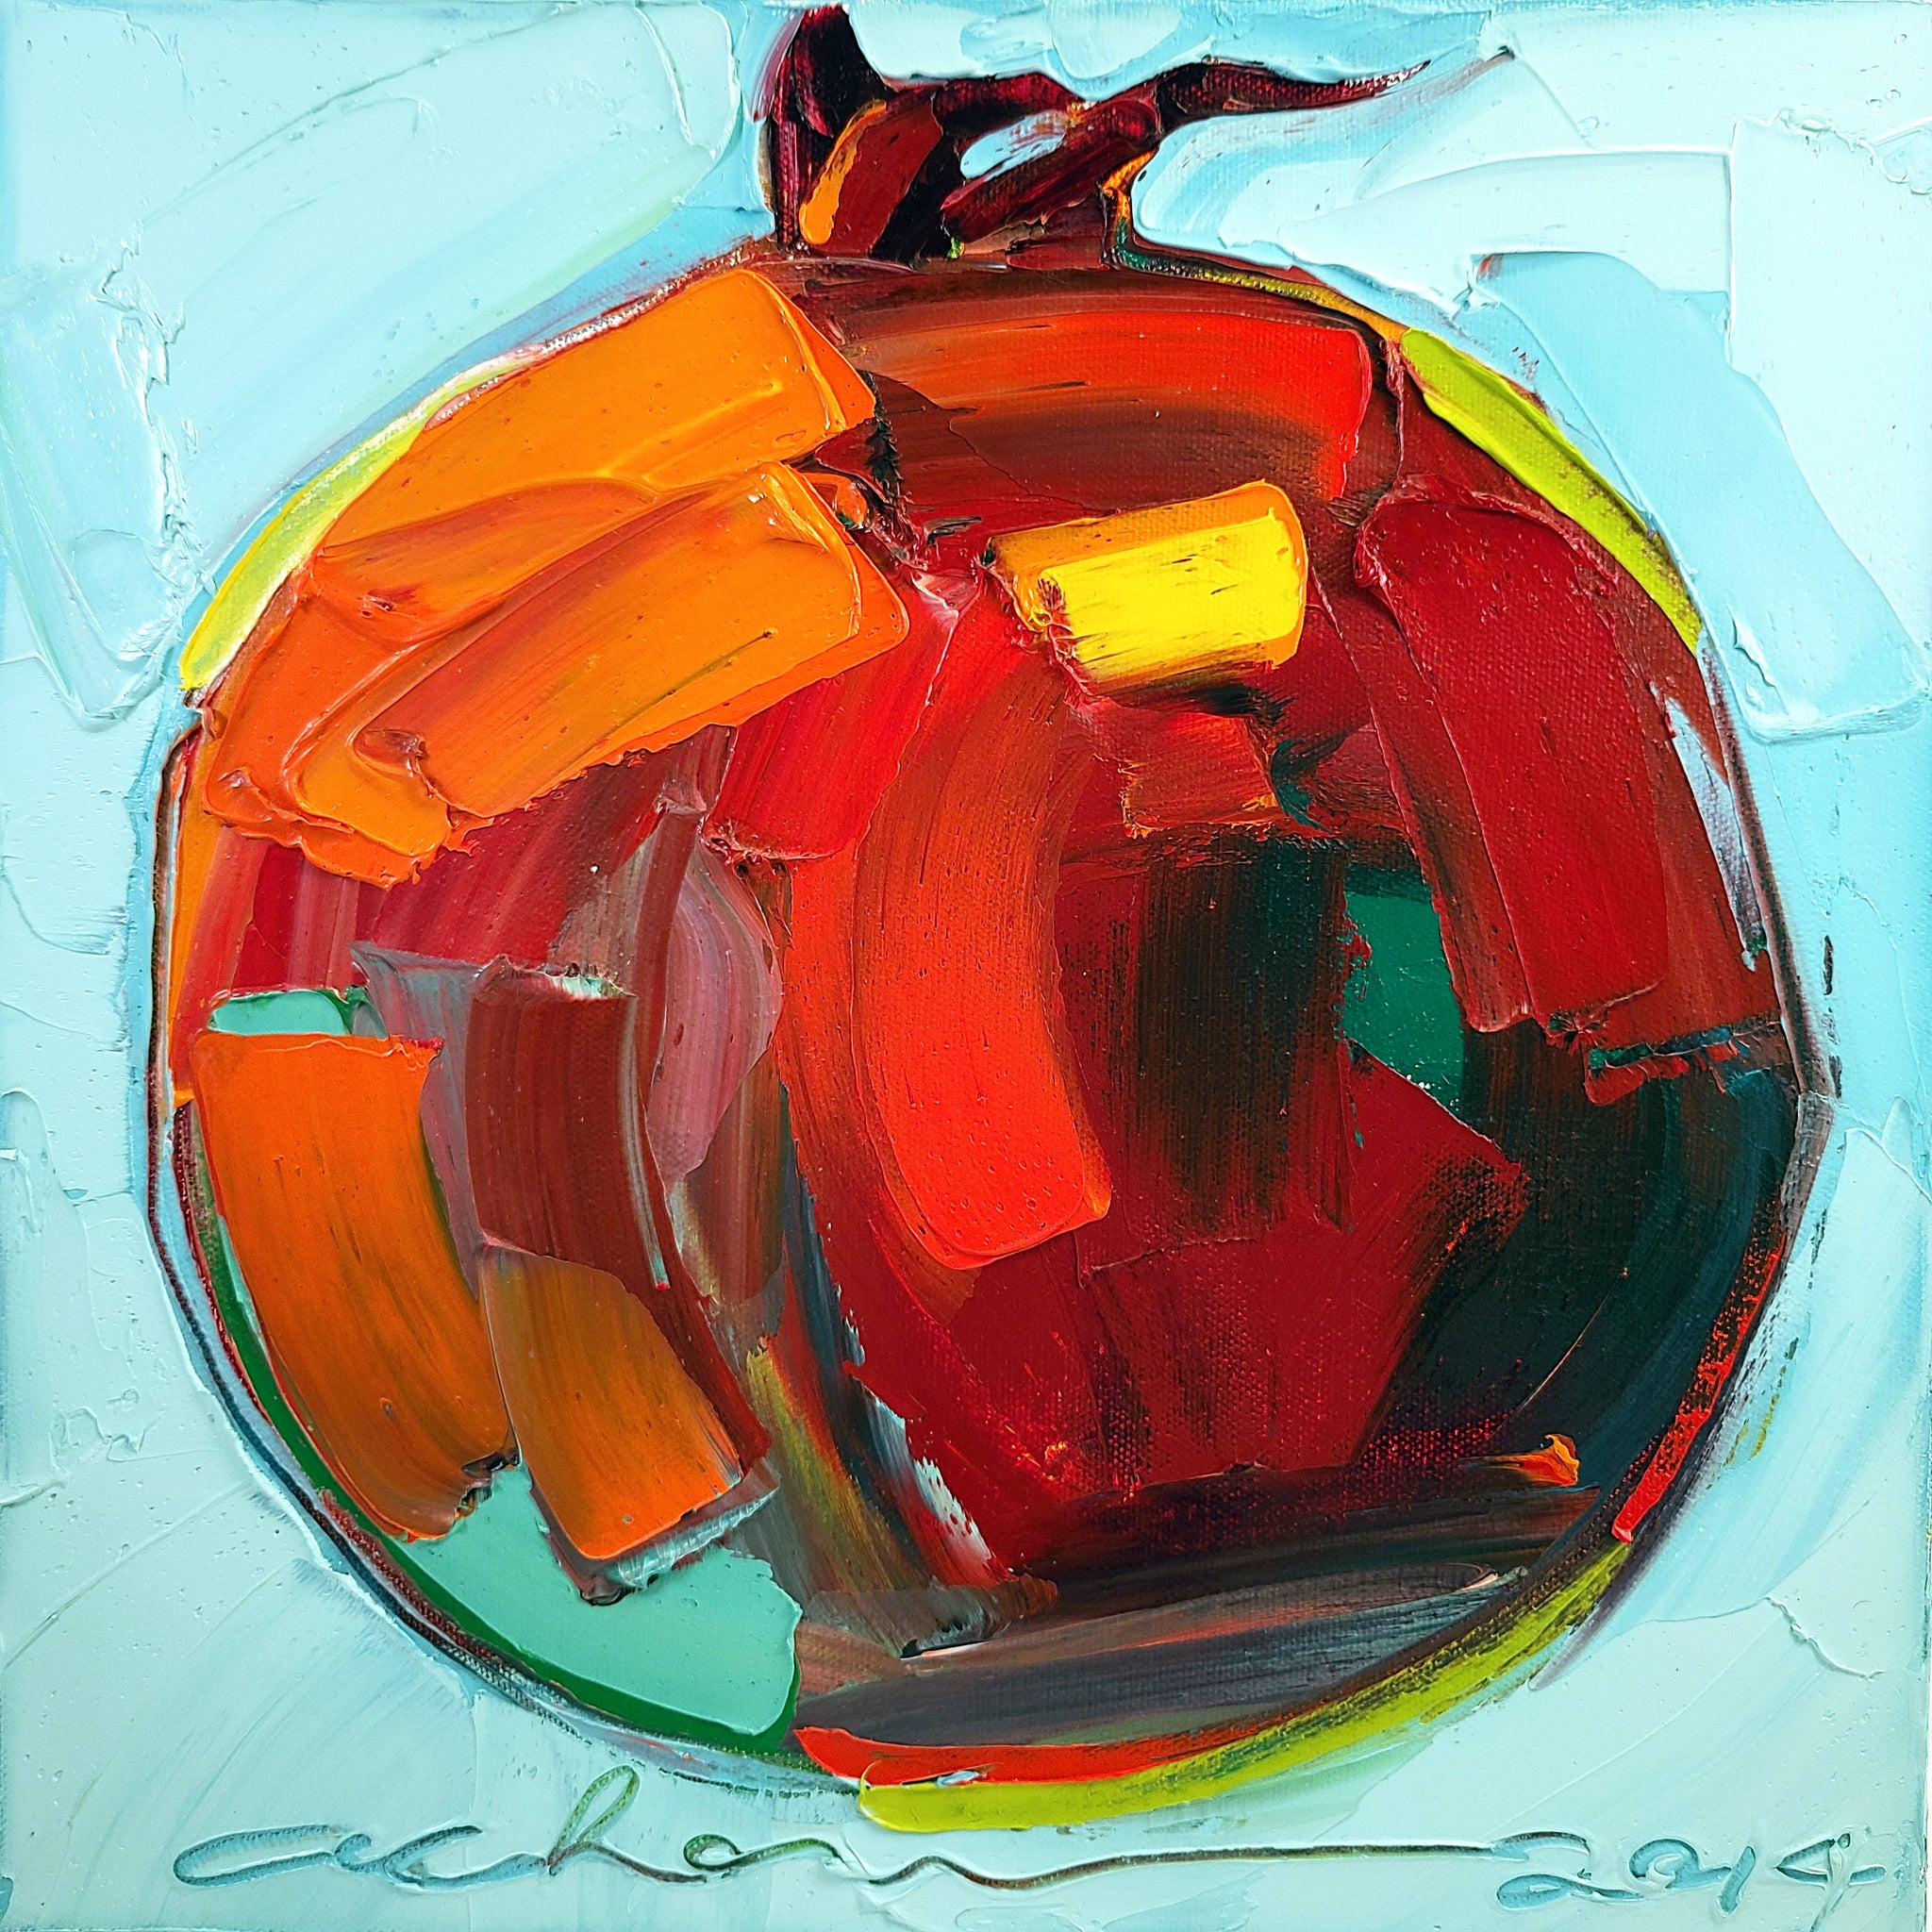 Chow - 12"x12" Oil Painting - "The Power of the Pomegranate"